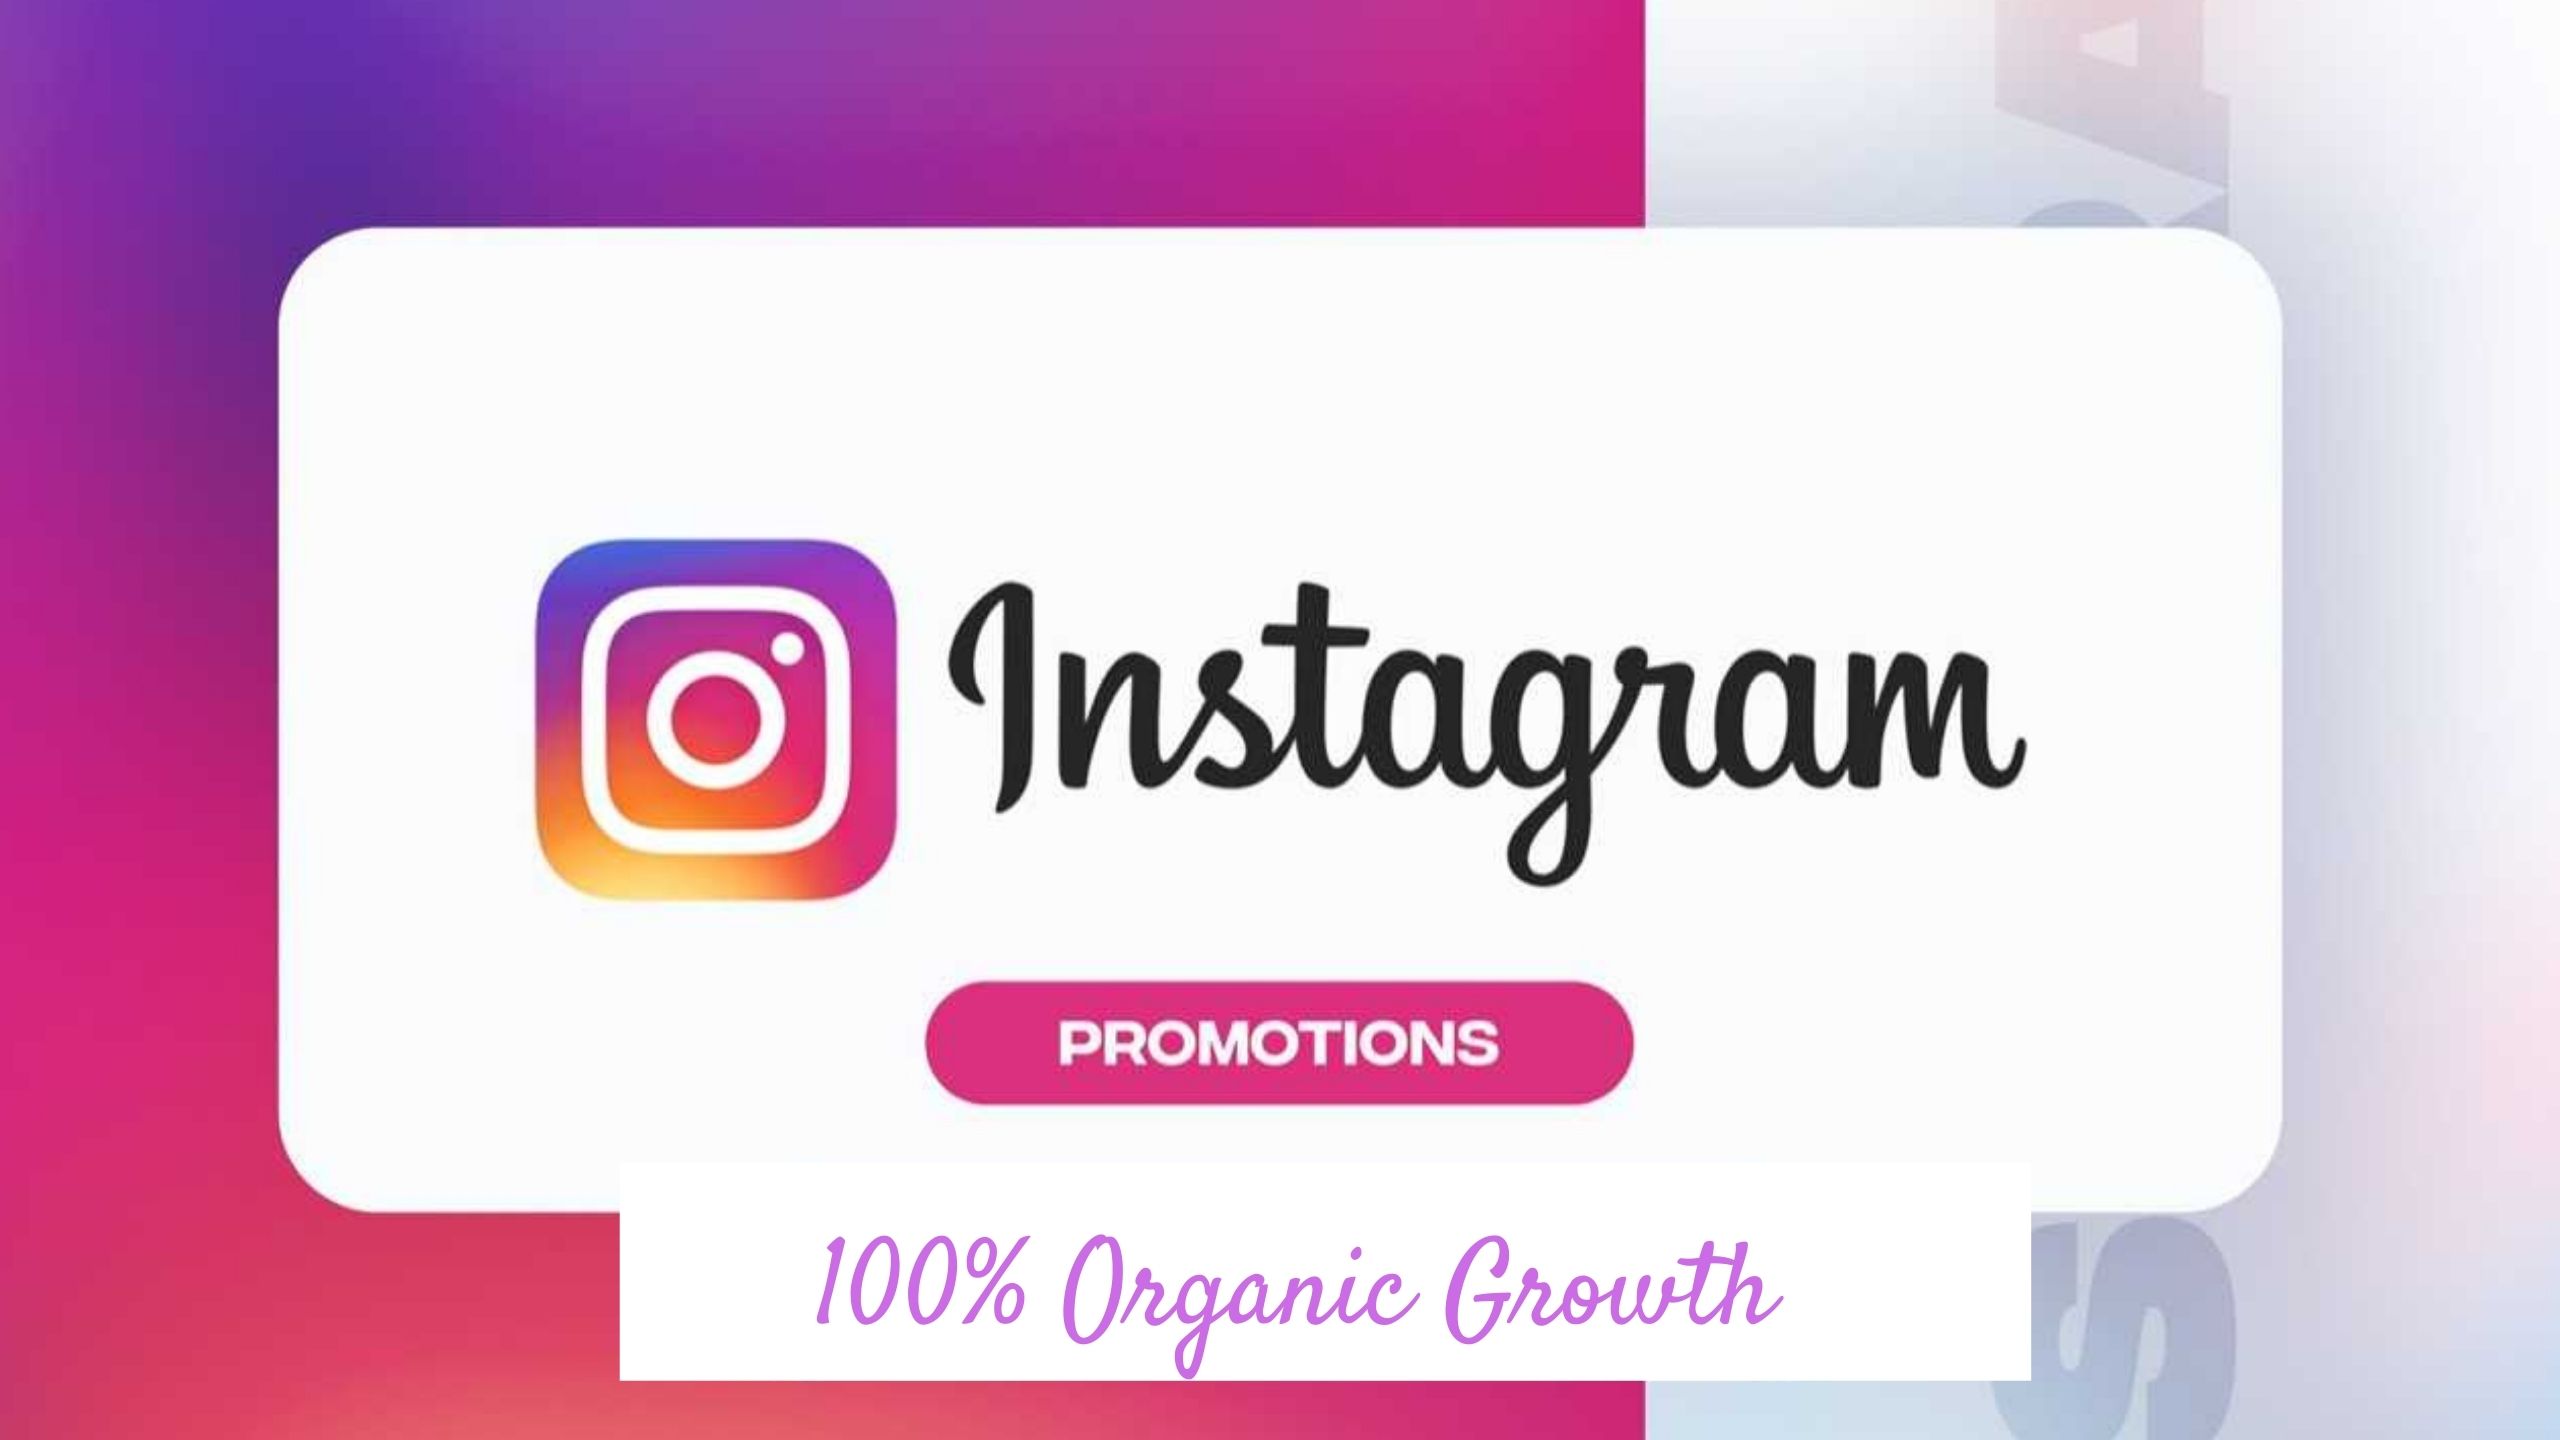 instagram marketing agency india, instagram advertising companies, instagram promotion services, instagram marketing india, instagram marketing company india, instagram ads cost india, instagram advertising company, how to get more followers on instagram, instagram reels algorithm, instagram promotion cost india